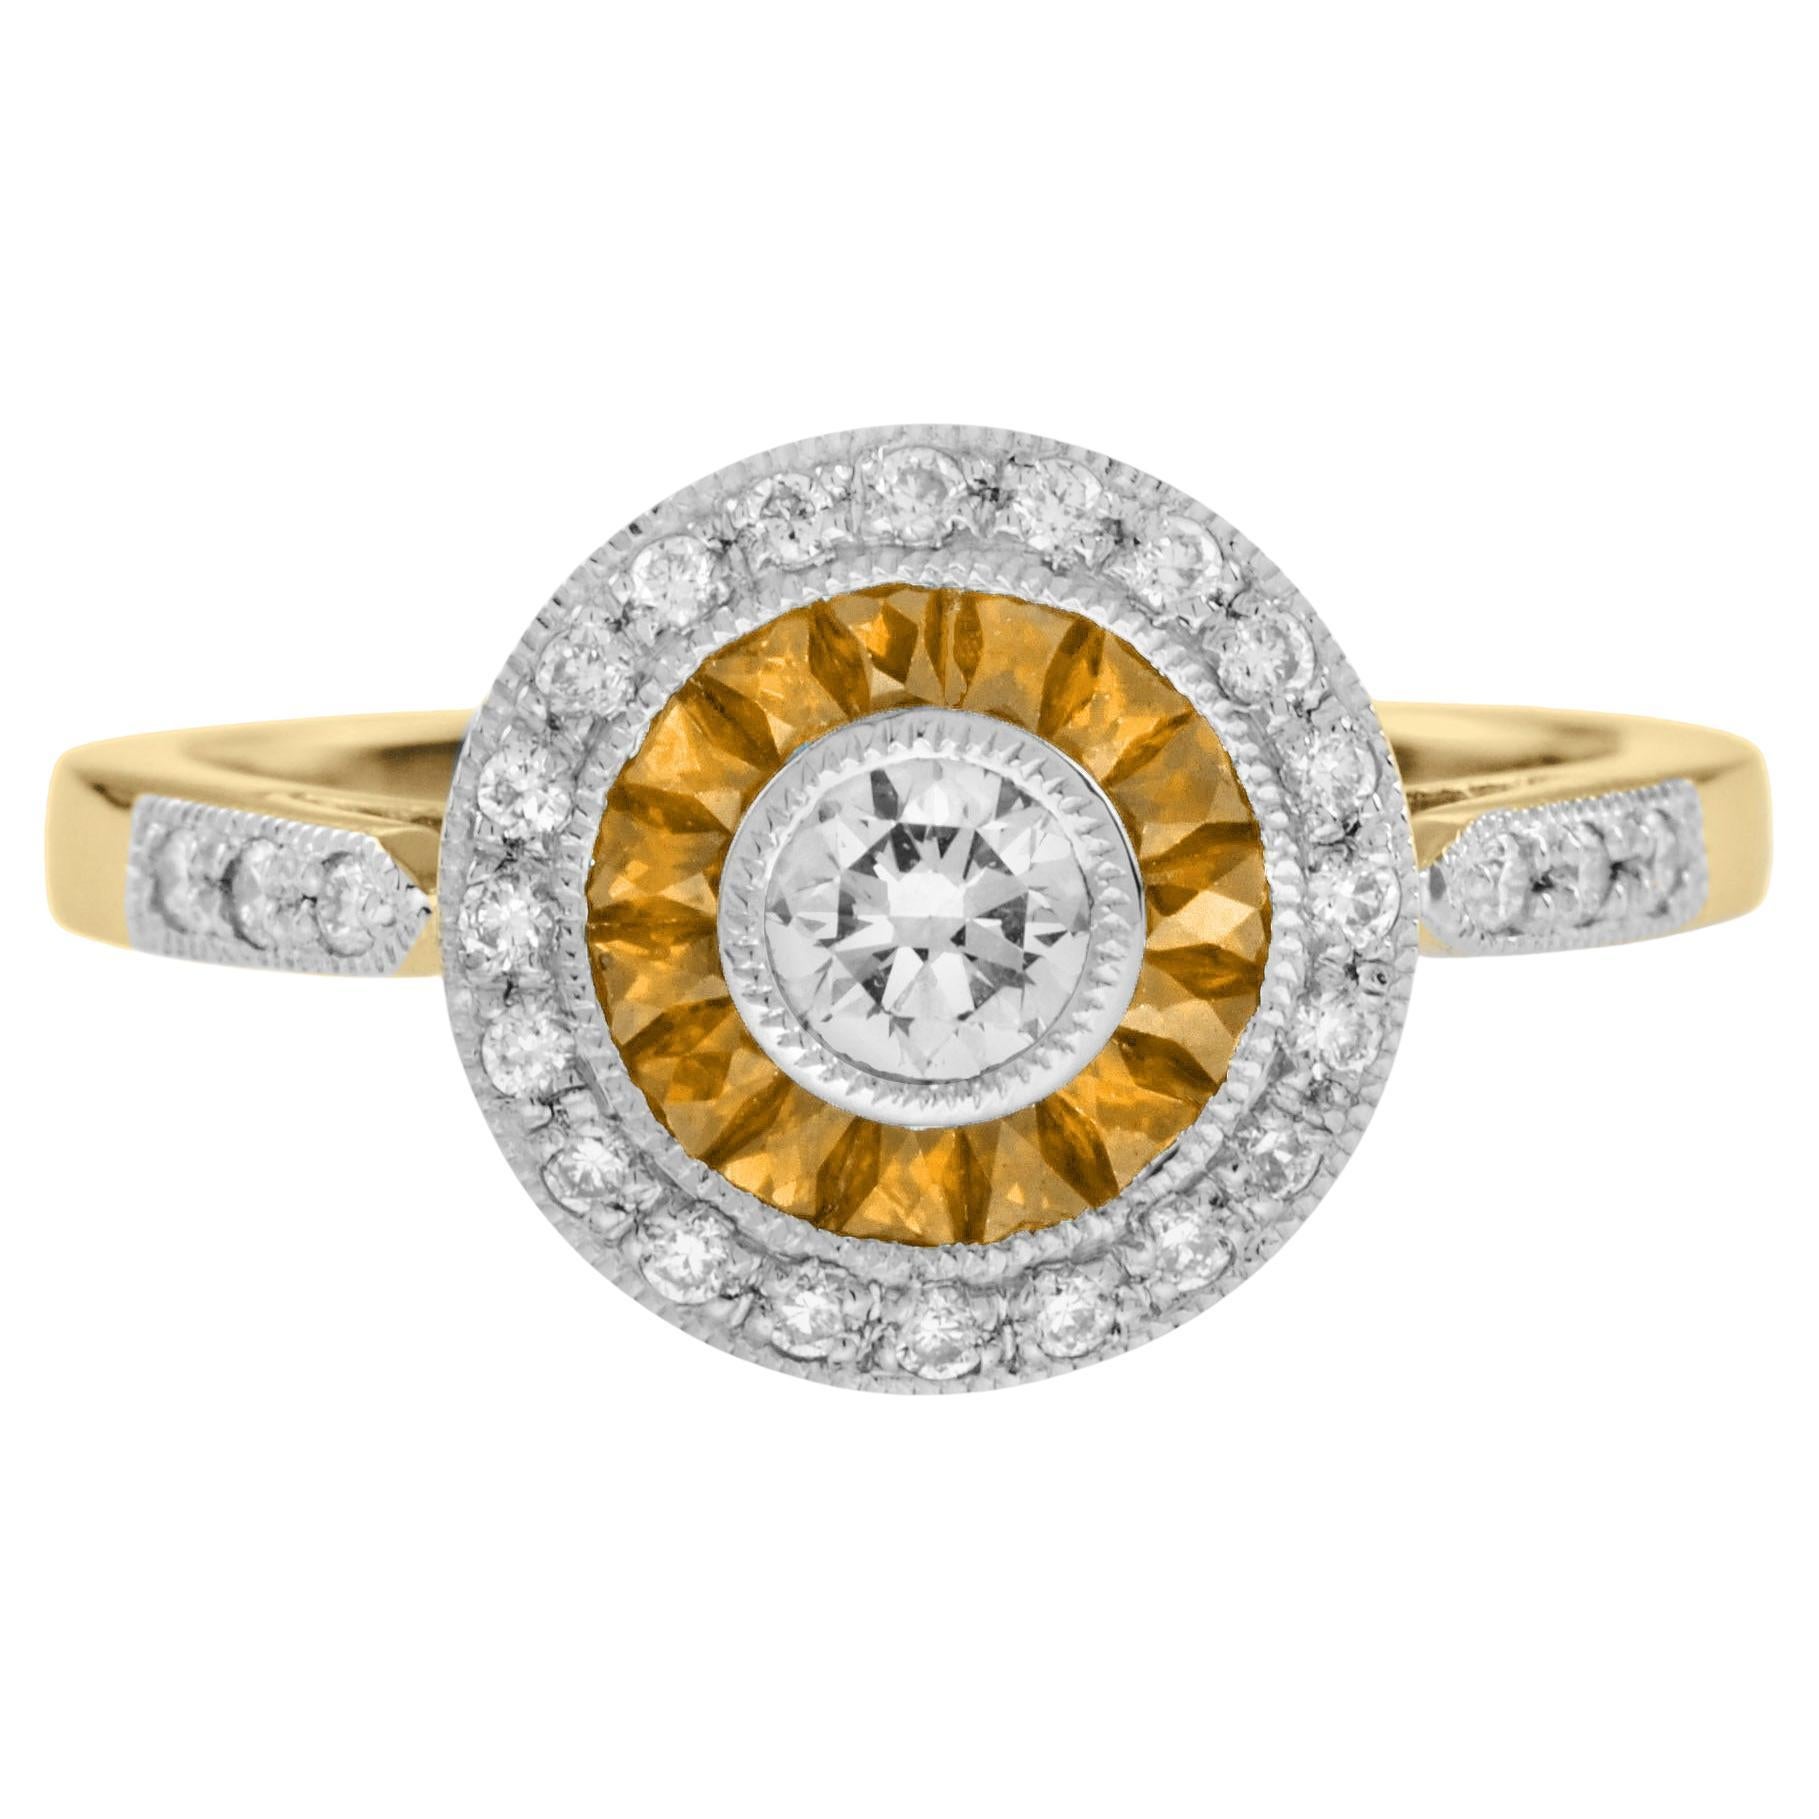 Diamond and Yellow Sapphire Art Deco Style Target Ring in 18K Two Tone Gold